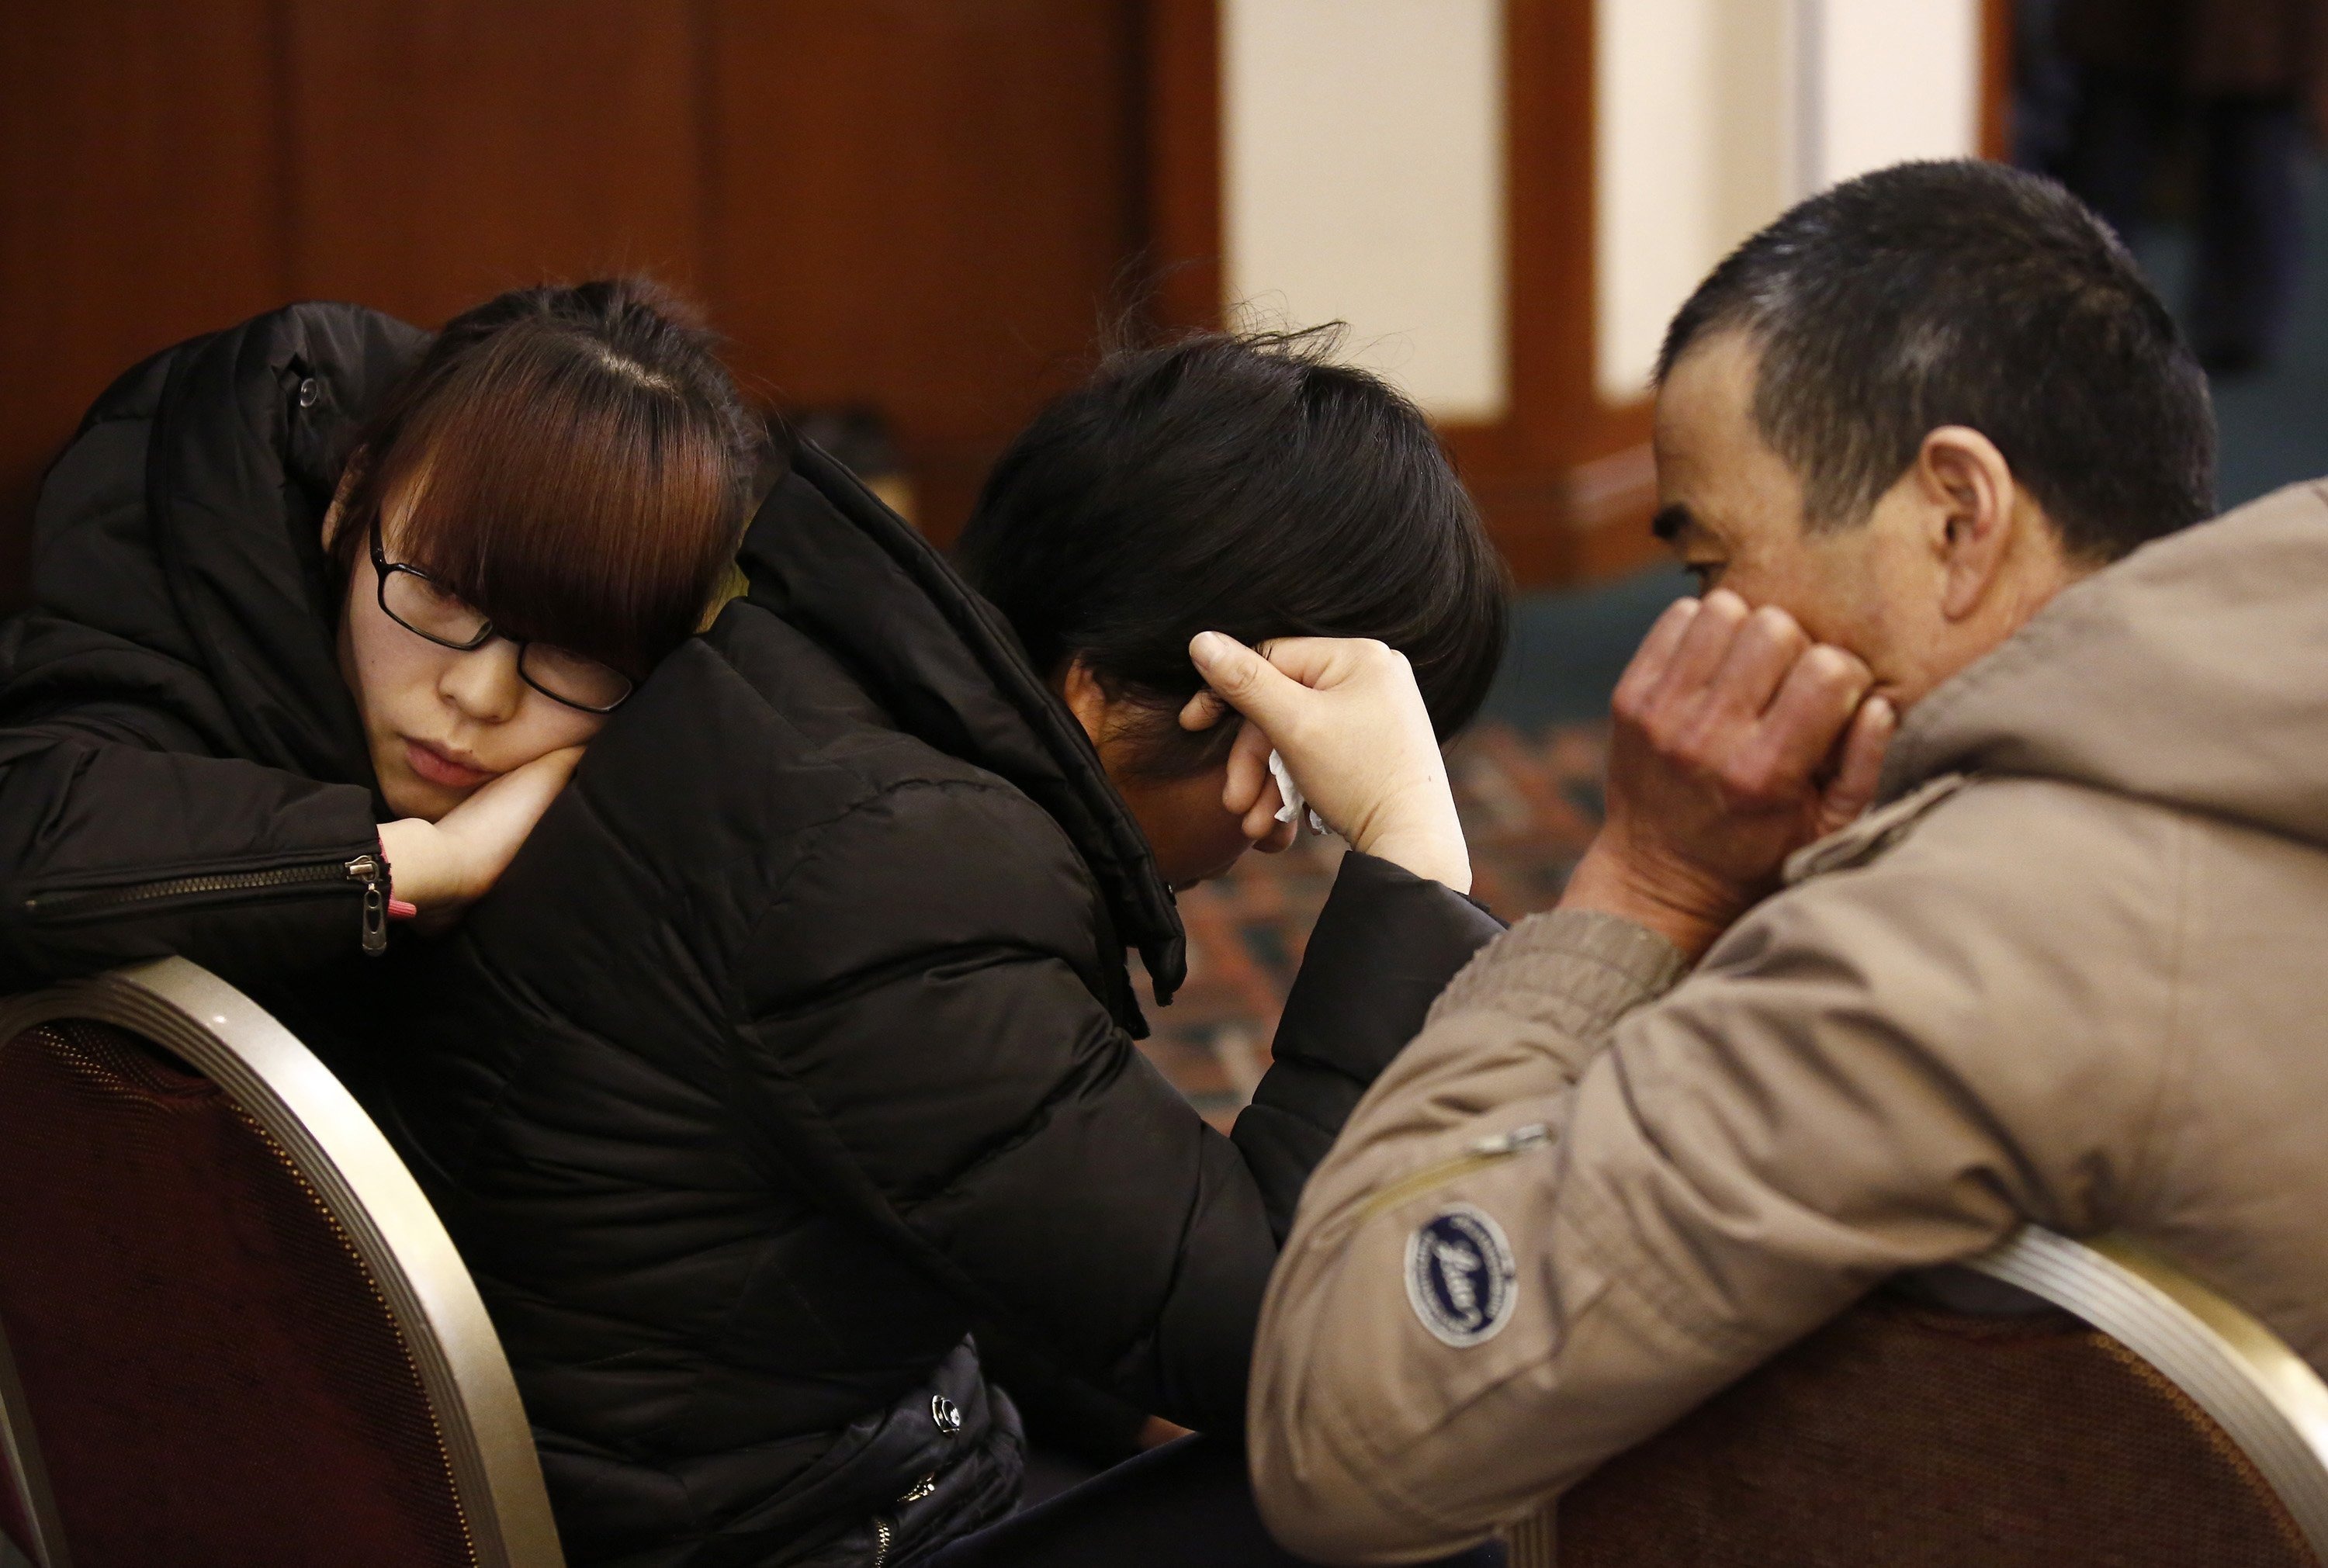 Family members of a passenger onboard the missing Malaysia Airlines flight MH370 react as they listen to a briefing from the airline company at a hotel in Beijing